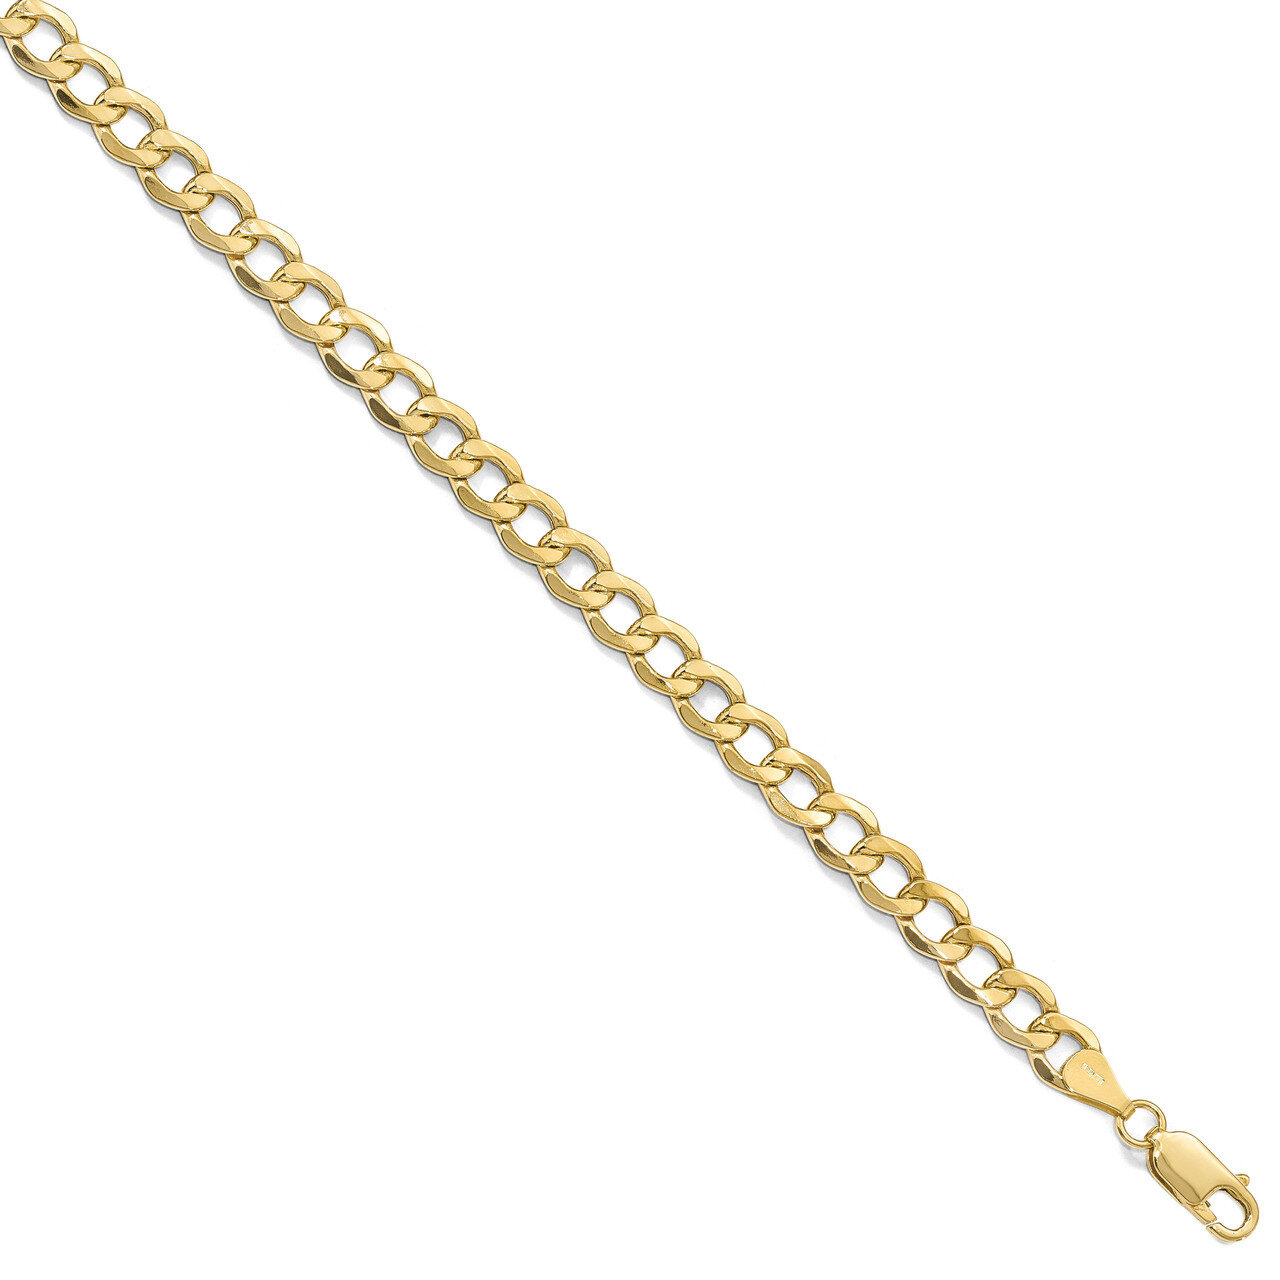 6.5mm Semi-Solid Curb Link Chain 20 Inch 10k Gold HB-8242-20